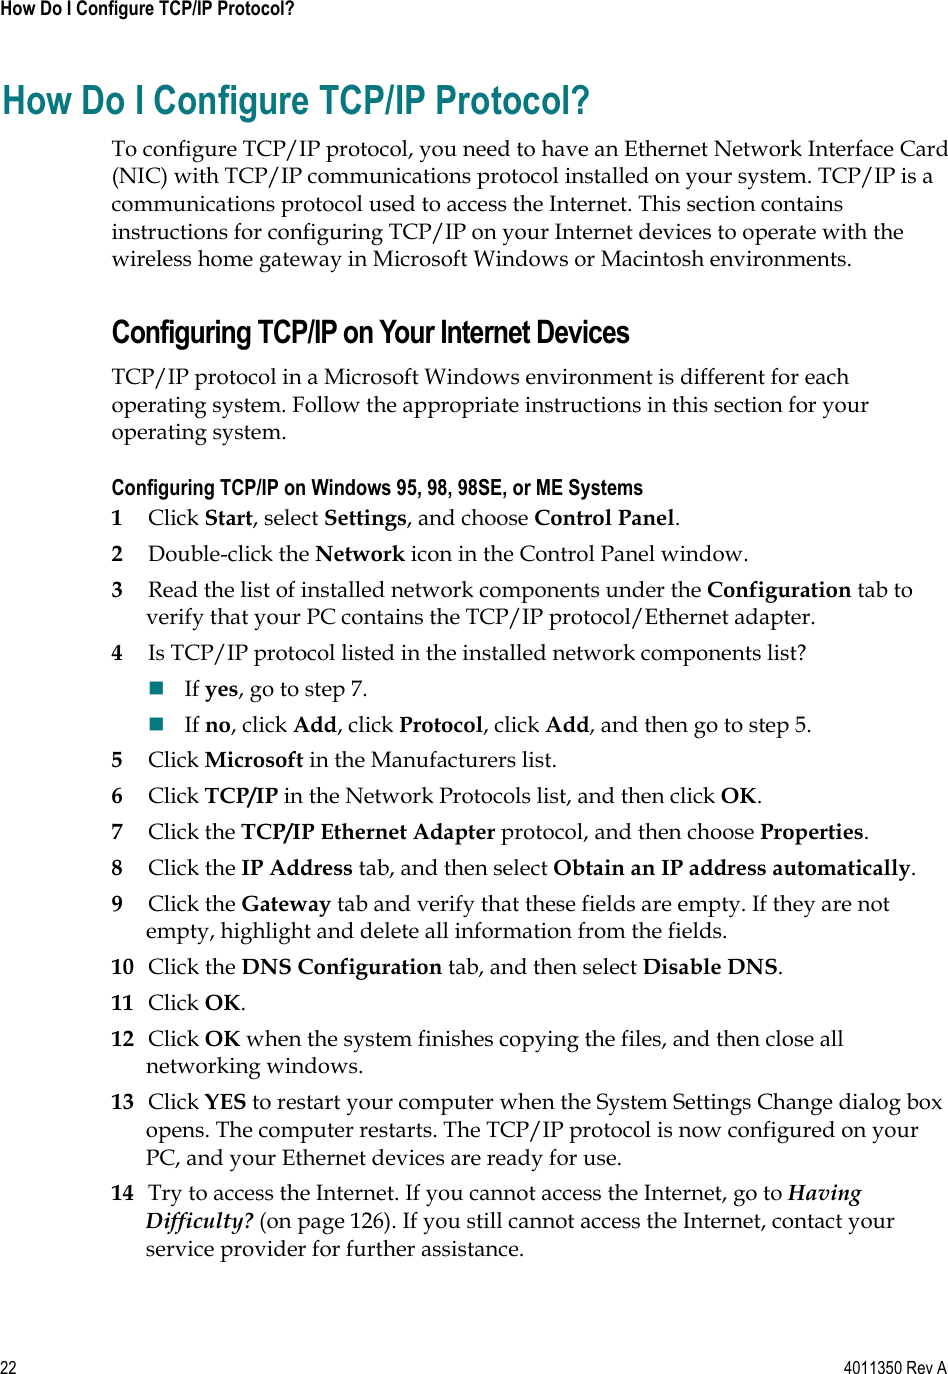 22    4011350 Rev A How Do I Configure TCP/IP Protocol? How Do I Configure TCP/IP Protocol? To configure TCP/IP protocol, you need to have an Ethernet Network Interface Card (NIC) with TCP/IP communications protocol installed on your system. TCP/IP is a communications protocol used to access the Internet. This section contains instructions for configuring TCP/IP on your Internet devices to operate with the wireless home gateway in Microsoft Windows or Macintosh environments. Configuring TCP/IP on Your Internet Devices TCP/IP protocol in a Microsoft Windows environment is different for each operating system. Follow the appropriate instructions in this section for your operating system. Configuring TCP/IP on Windows 95, 98, 98SE, or ME Systems 1Click Start, select Settings, and choose Control Panel.2Double-click the Network icon in the Control Panel window. 3Read the list of installed network components under the Configuration tab to verify that your PC contains the TCP/IP protocol/Ethernet adapter. 4Is TCP/IP protocol listed in the installed network components list? If yes, go to step 7. If no, click Add, click Protocol, click Add, and then go to step 5. 5Click Microsoft in the Manufacturers list. 6Click TCP/IP in the Network Protocols list, and then click OK.7Click the TCP/IP Ethernet Adapter protocol, and then choose Properties.8Click the IP Address tab, and then select Obtain an IP address automatically.9Click the Gateway tab and verify that these fields are empty. If they are not empty, highlight and delete all information from the fields. 10 Click the DNS Configuration tab, and then select Disable DNS.11 Click OK.12 Click OK when the system finishes copying the files, and then close all networking windows. 13 Click YES to restart your computer when the System Settings Change dialog box opens. The computer restarts. The TCP/IP protocol is now configured on your PC, and your Ethernet devices are ready for use. 14 Try to access the Internet. If you cannot access the Internet, go to HavingDifficulty? (on page 126). If you still cannot access the Internet, contact your service provider for further assistance. 